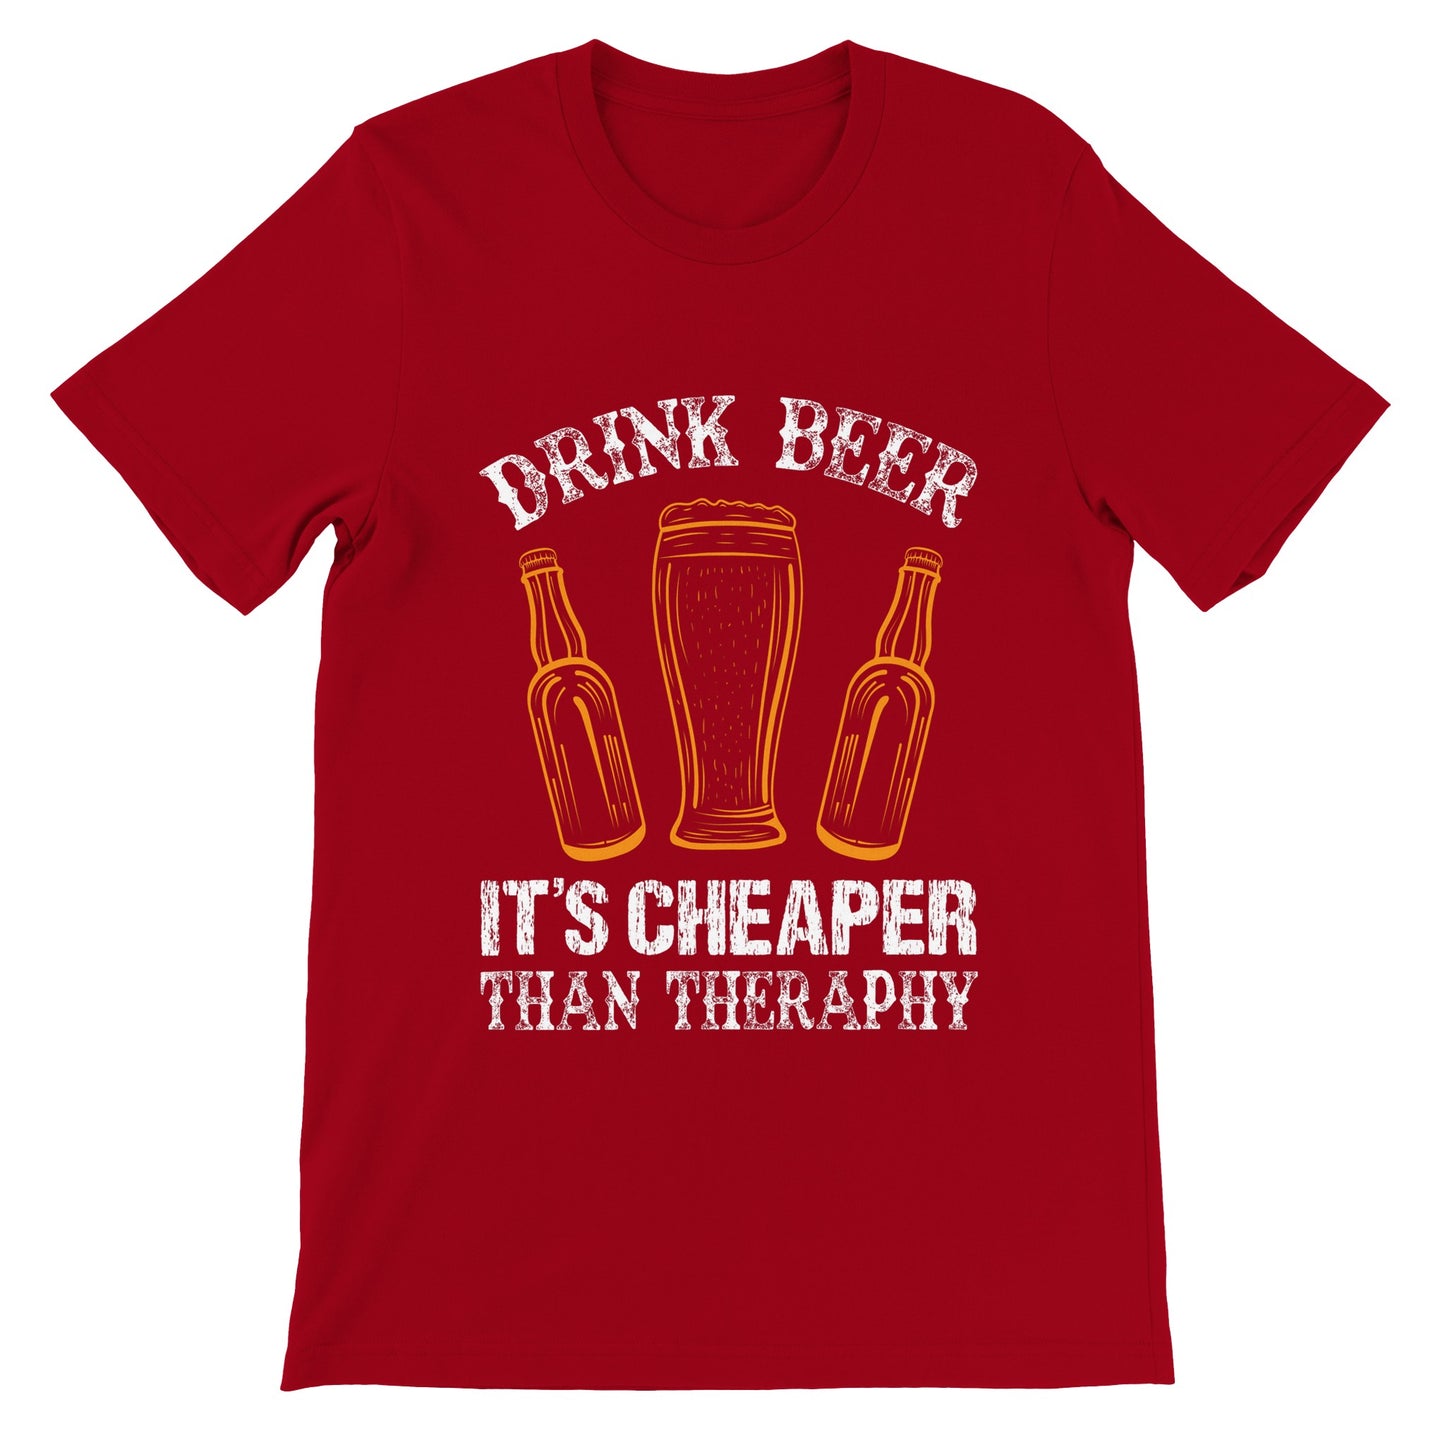 Sjove T-shirts - Drink Beer, It's Cheaper Than Theraphy - Premium Unisex T-shirt